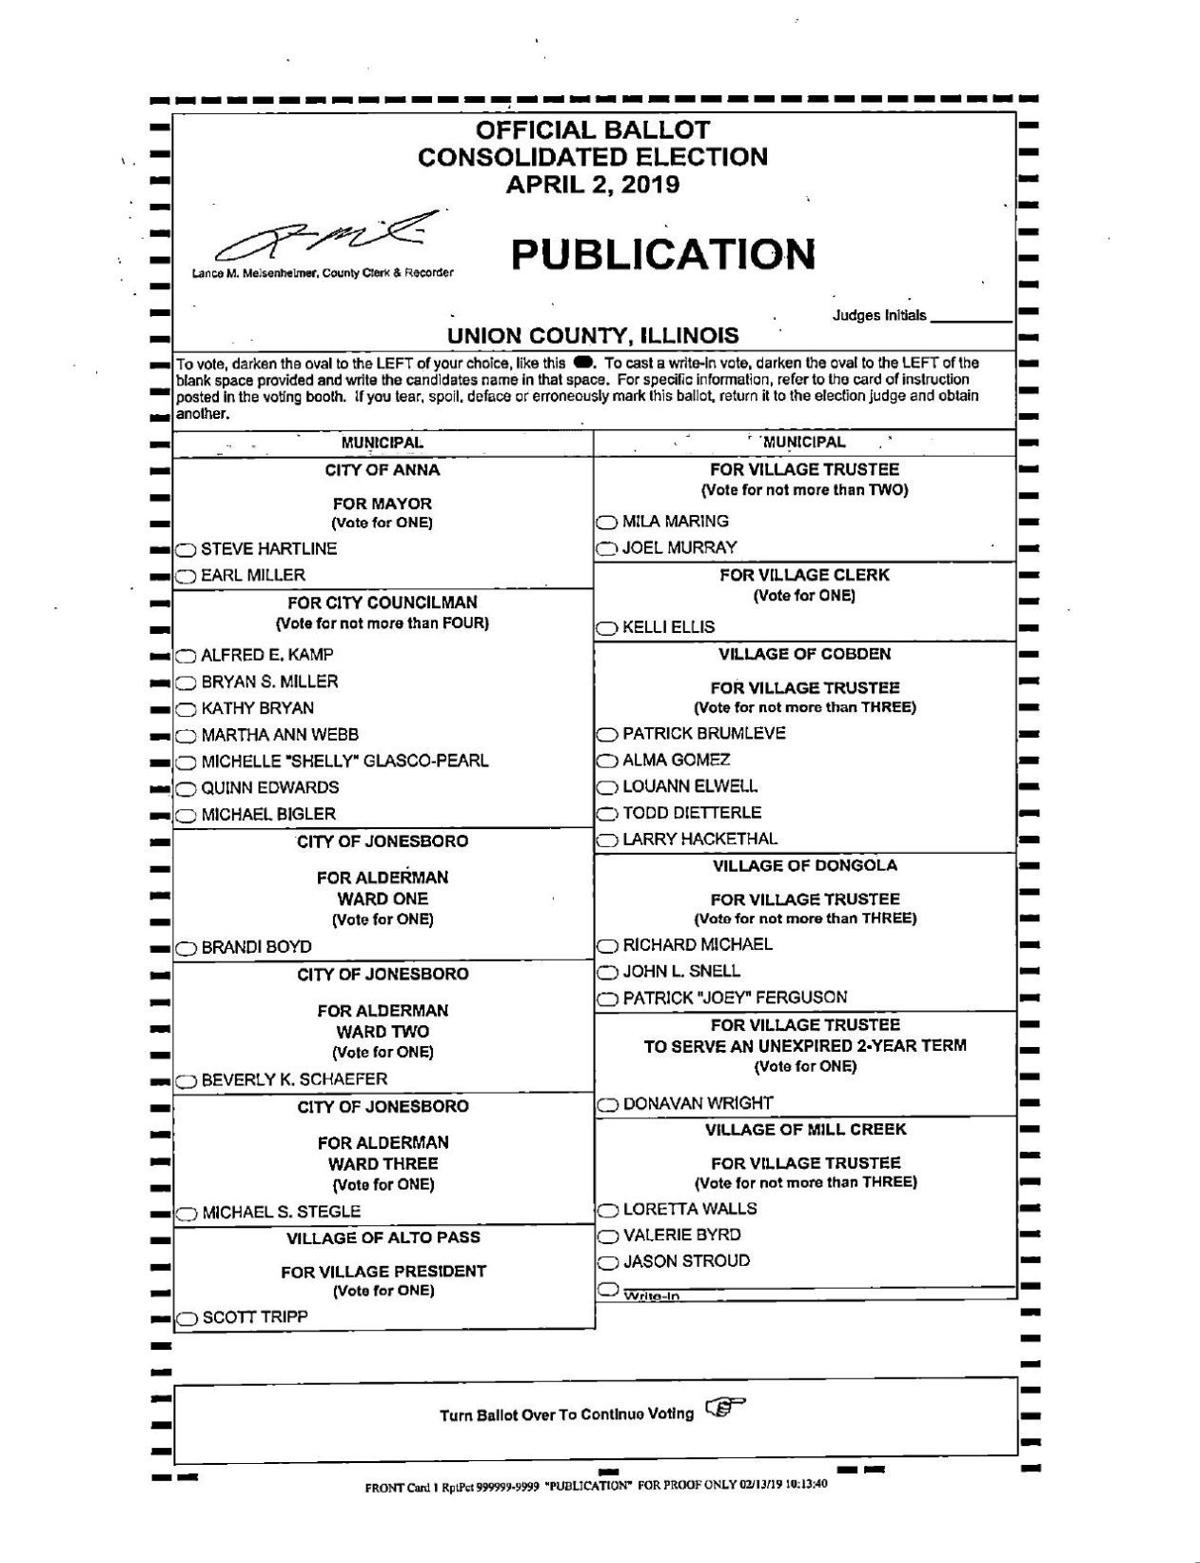 Union County publication ballot for 2019 consolidated election